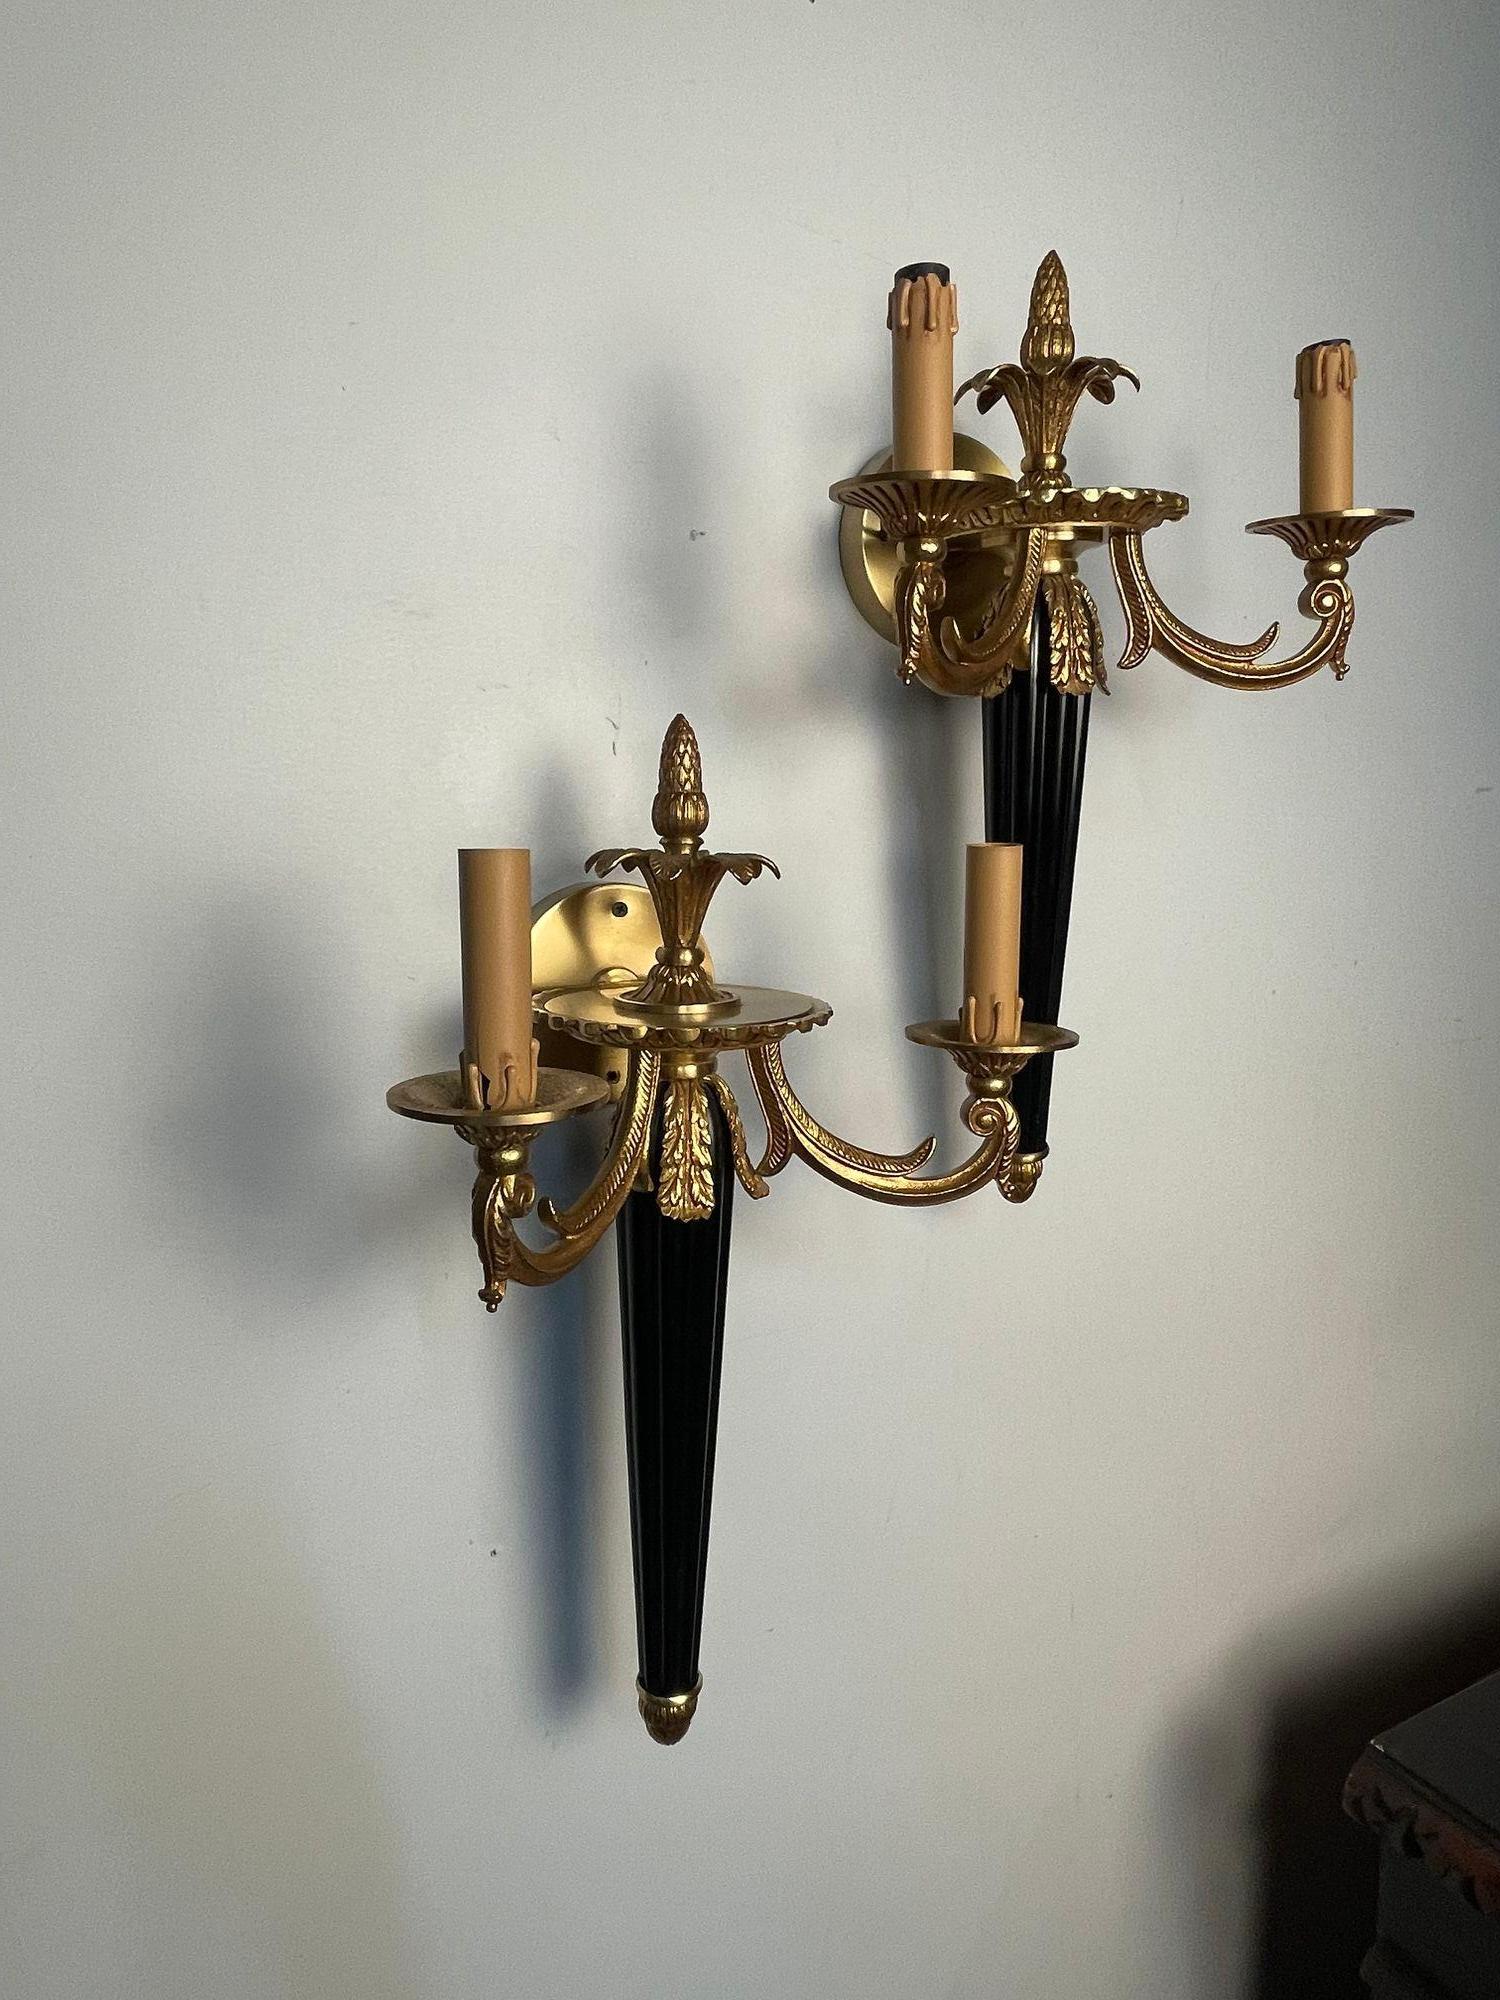 Pair of Louis XVI French Style Wall Sconces, Bronze, Ebony, Hollywood Regency, In the Manner of Maison Bagues

A strickingly well crafted pair of stylish wall sconces each having bronze adornments with a reeded ebony column center. The pair having